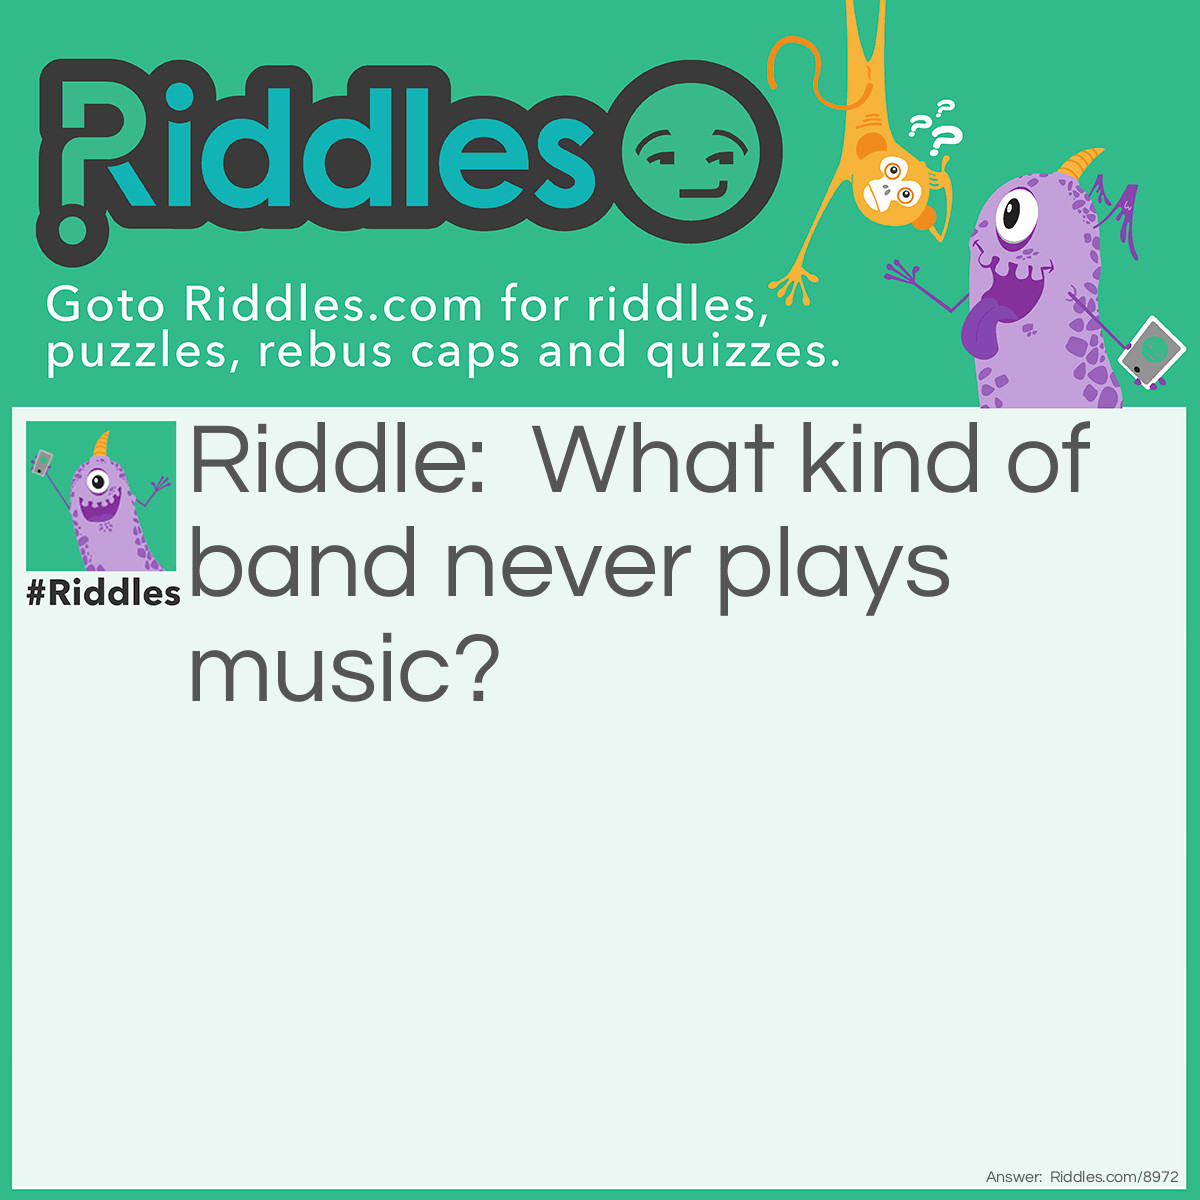 Riddle: What kind of band never plays music? Answer: A rubber band.